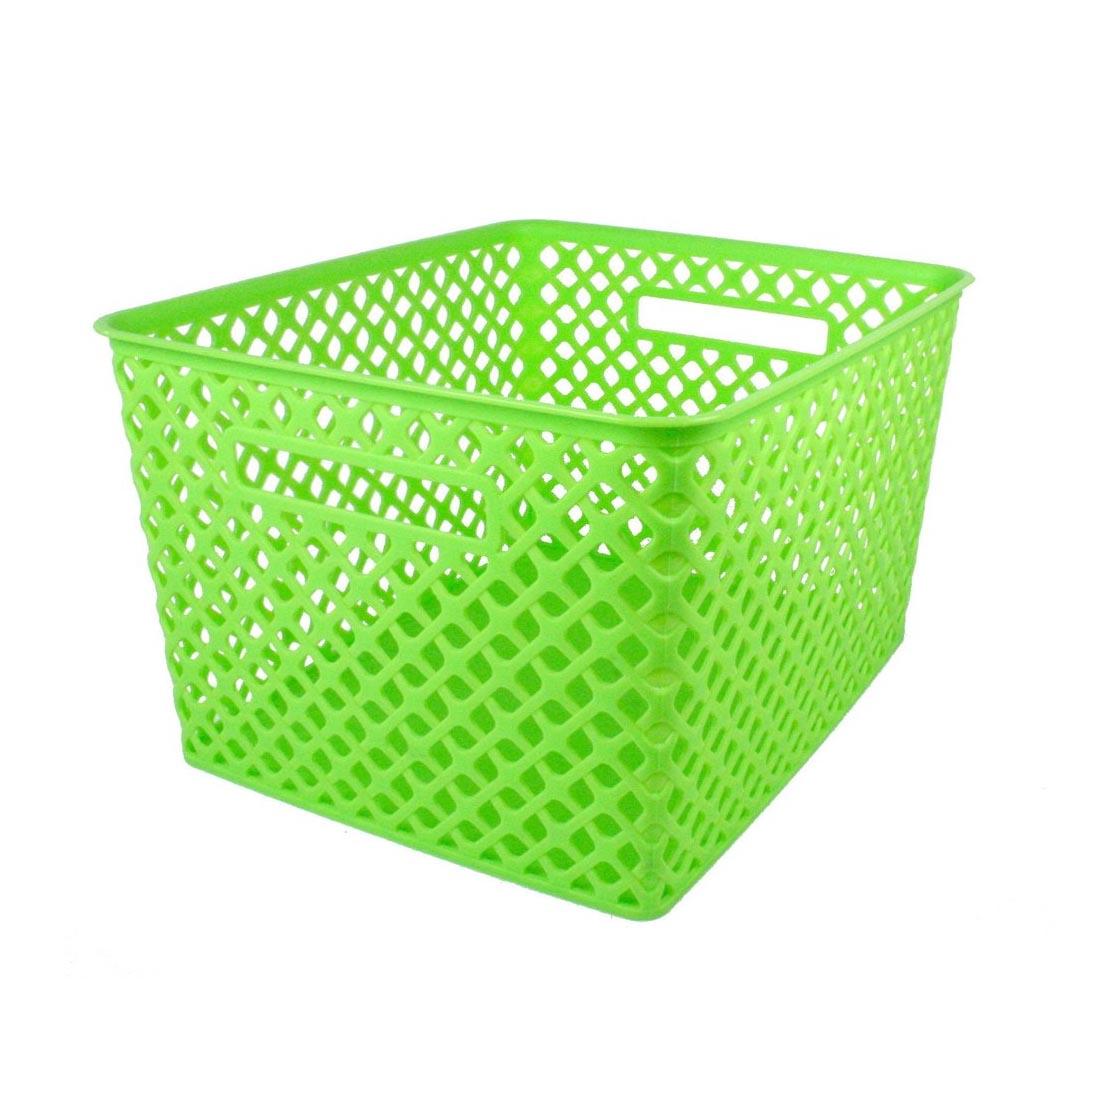 Romanoff Products Large Lime Weave Storage Basket